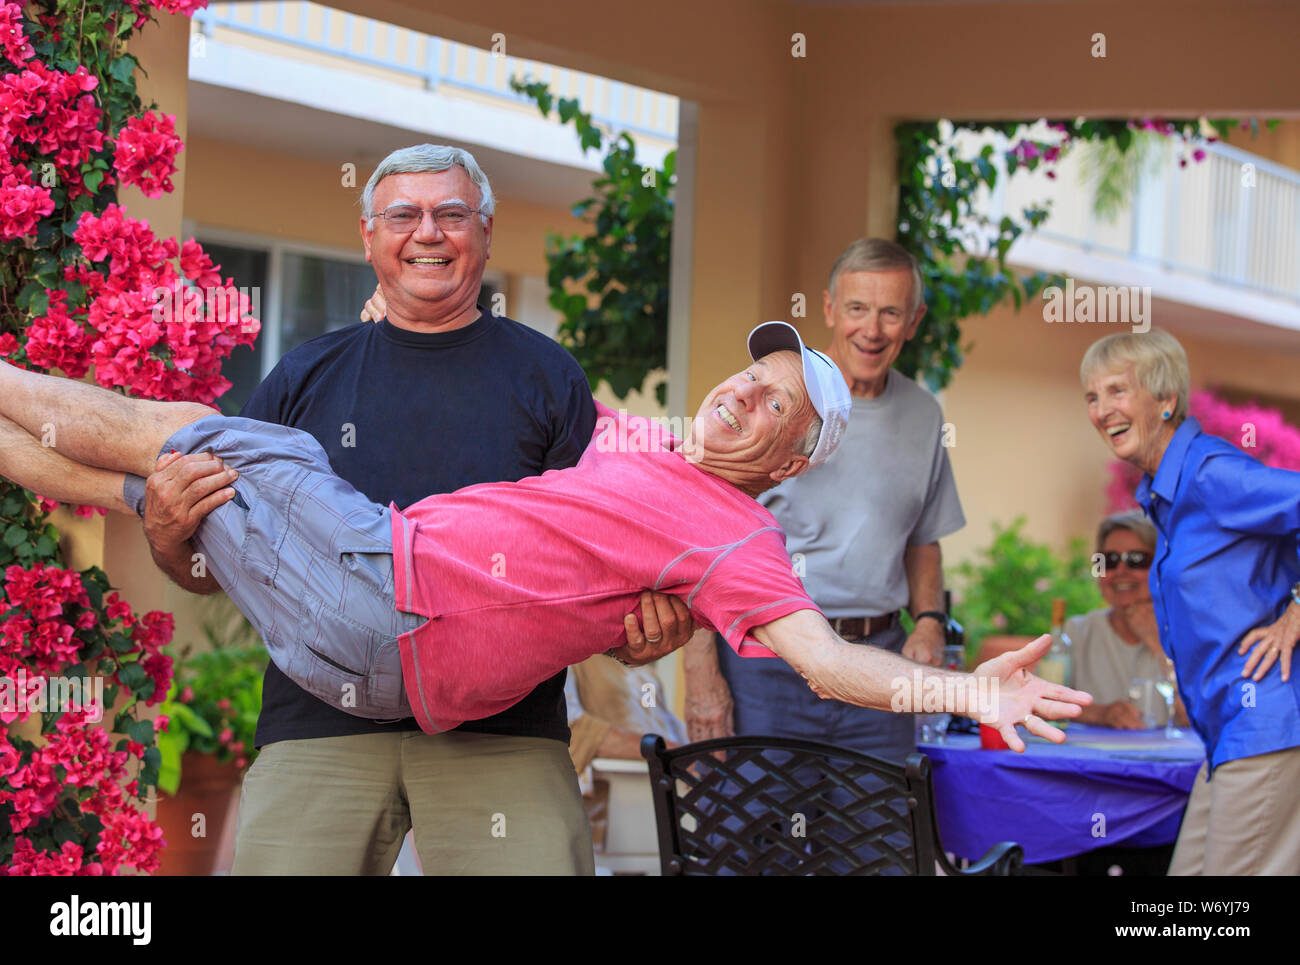 Happy senior people having fun at a party outside Stock Photo